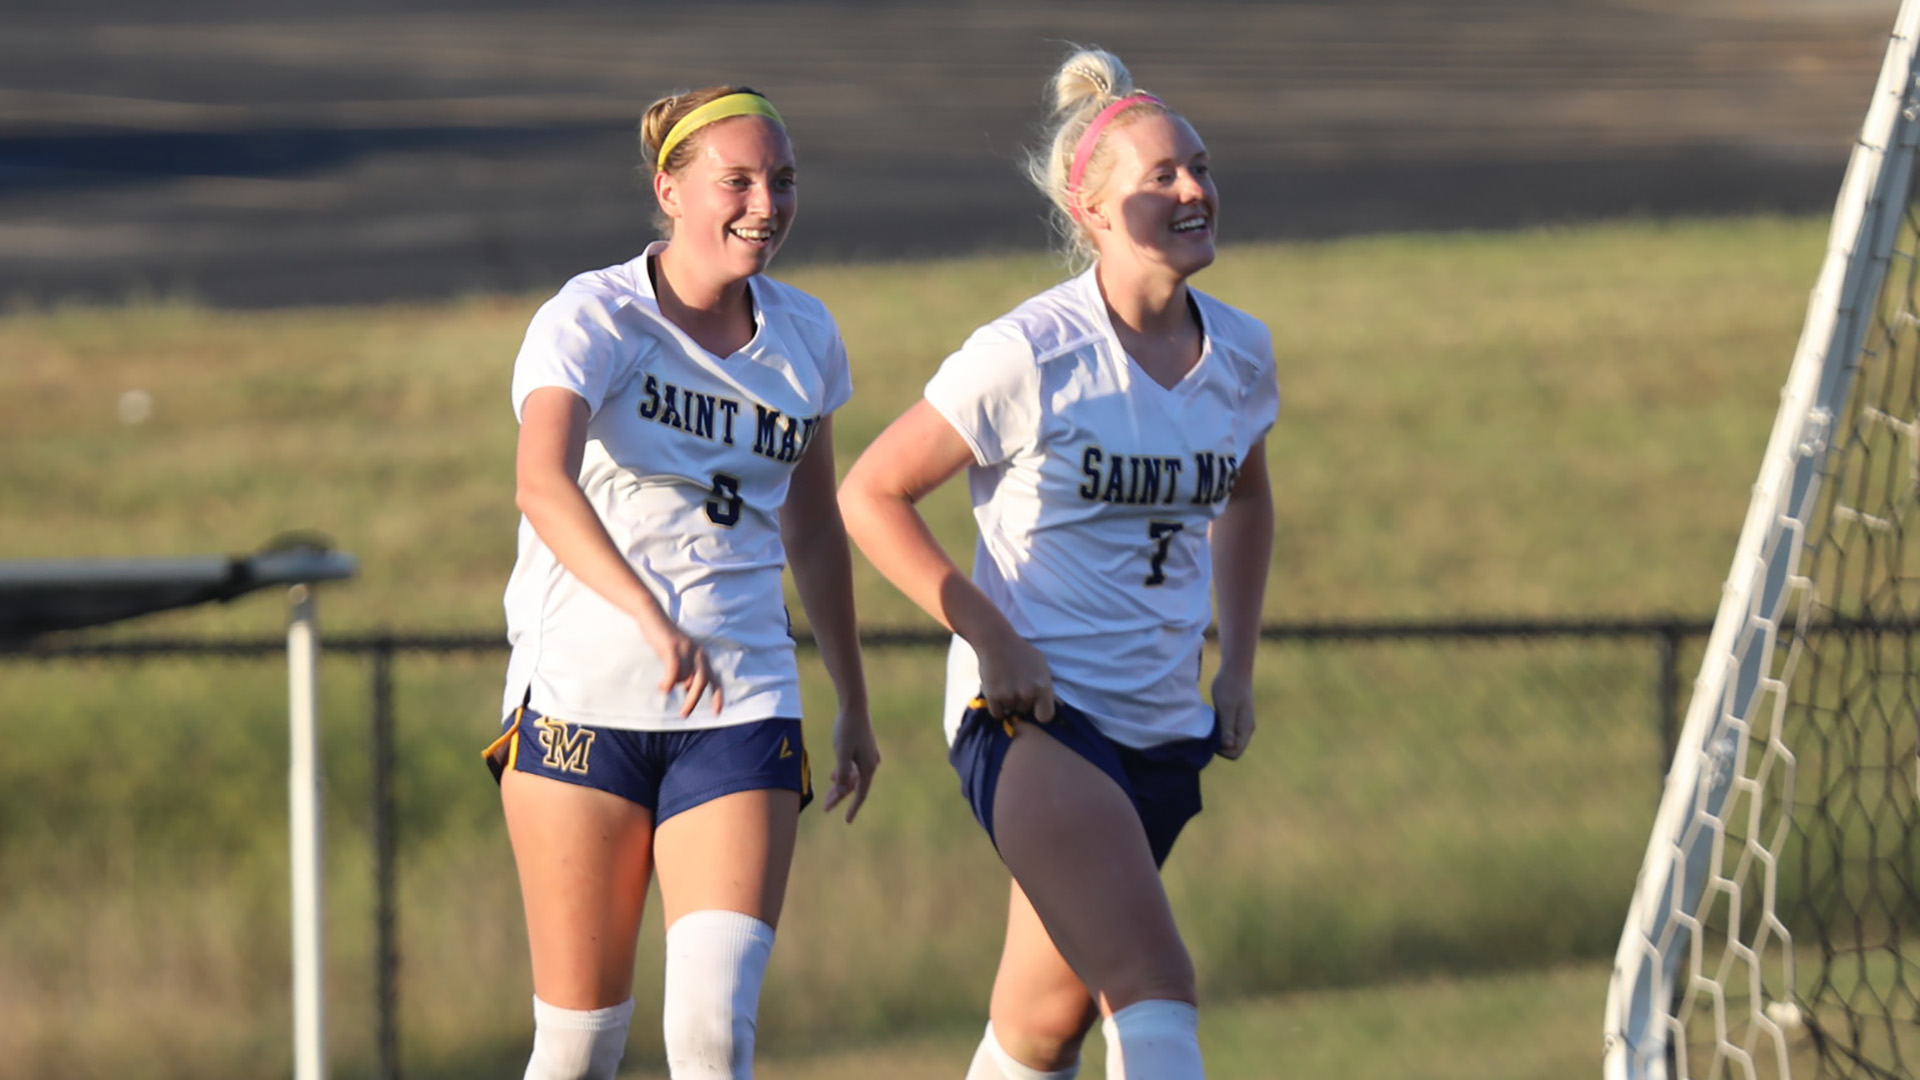 Spires Win Second Straight Game After Yingling's Goal